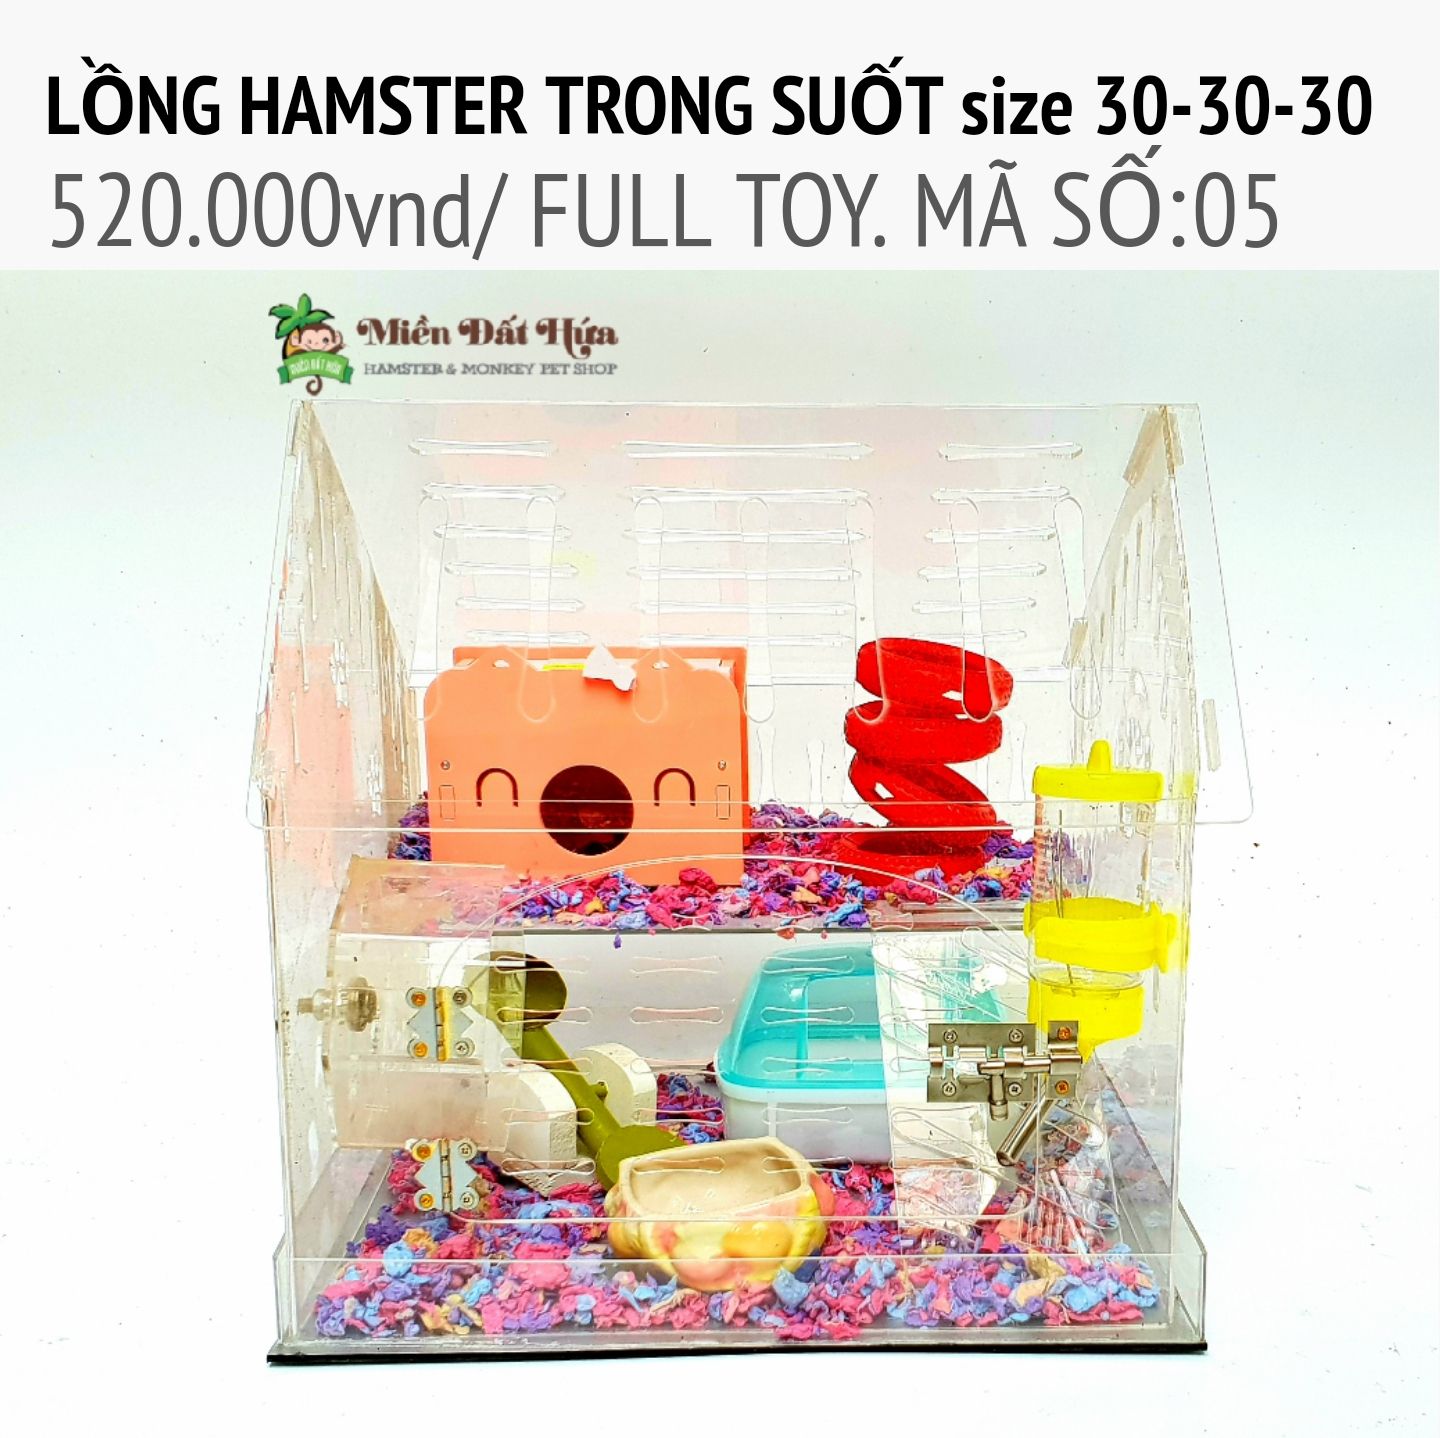 LỒNG hamster trong suốt size 30-30-30 ms05